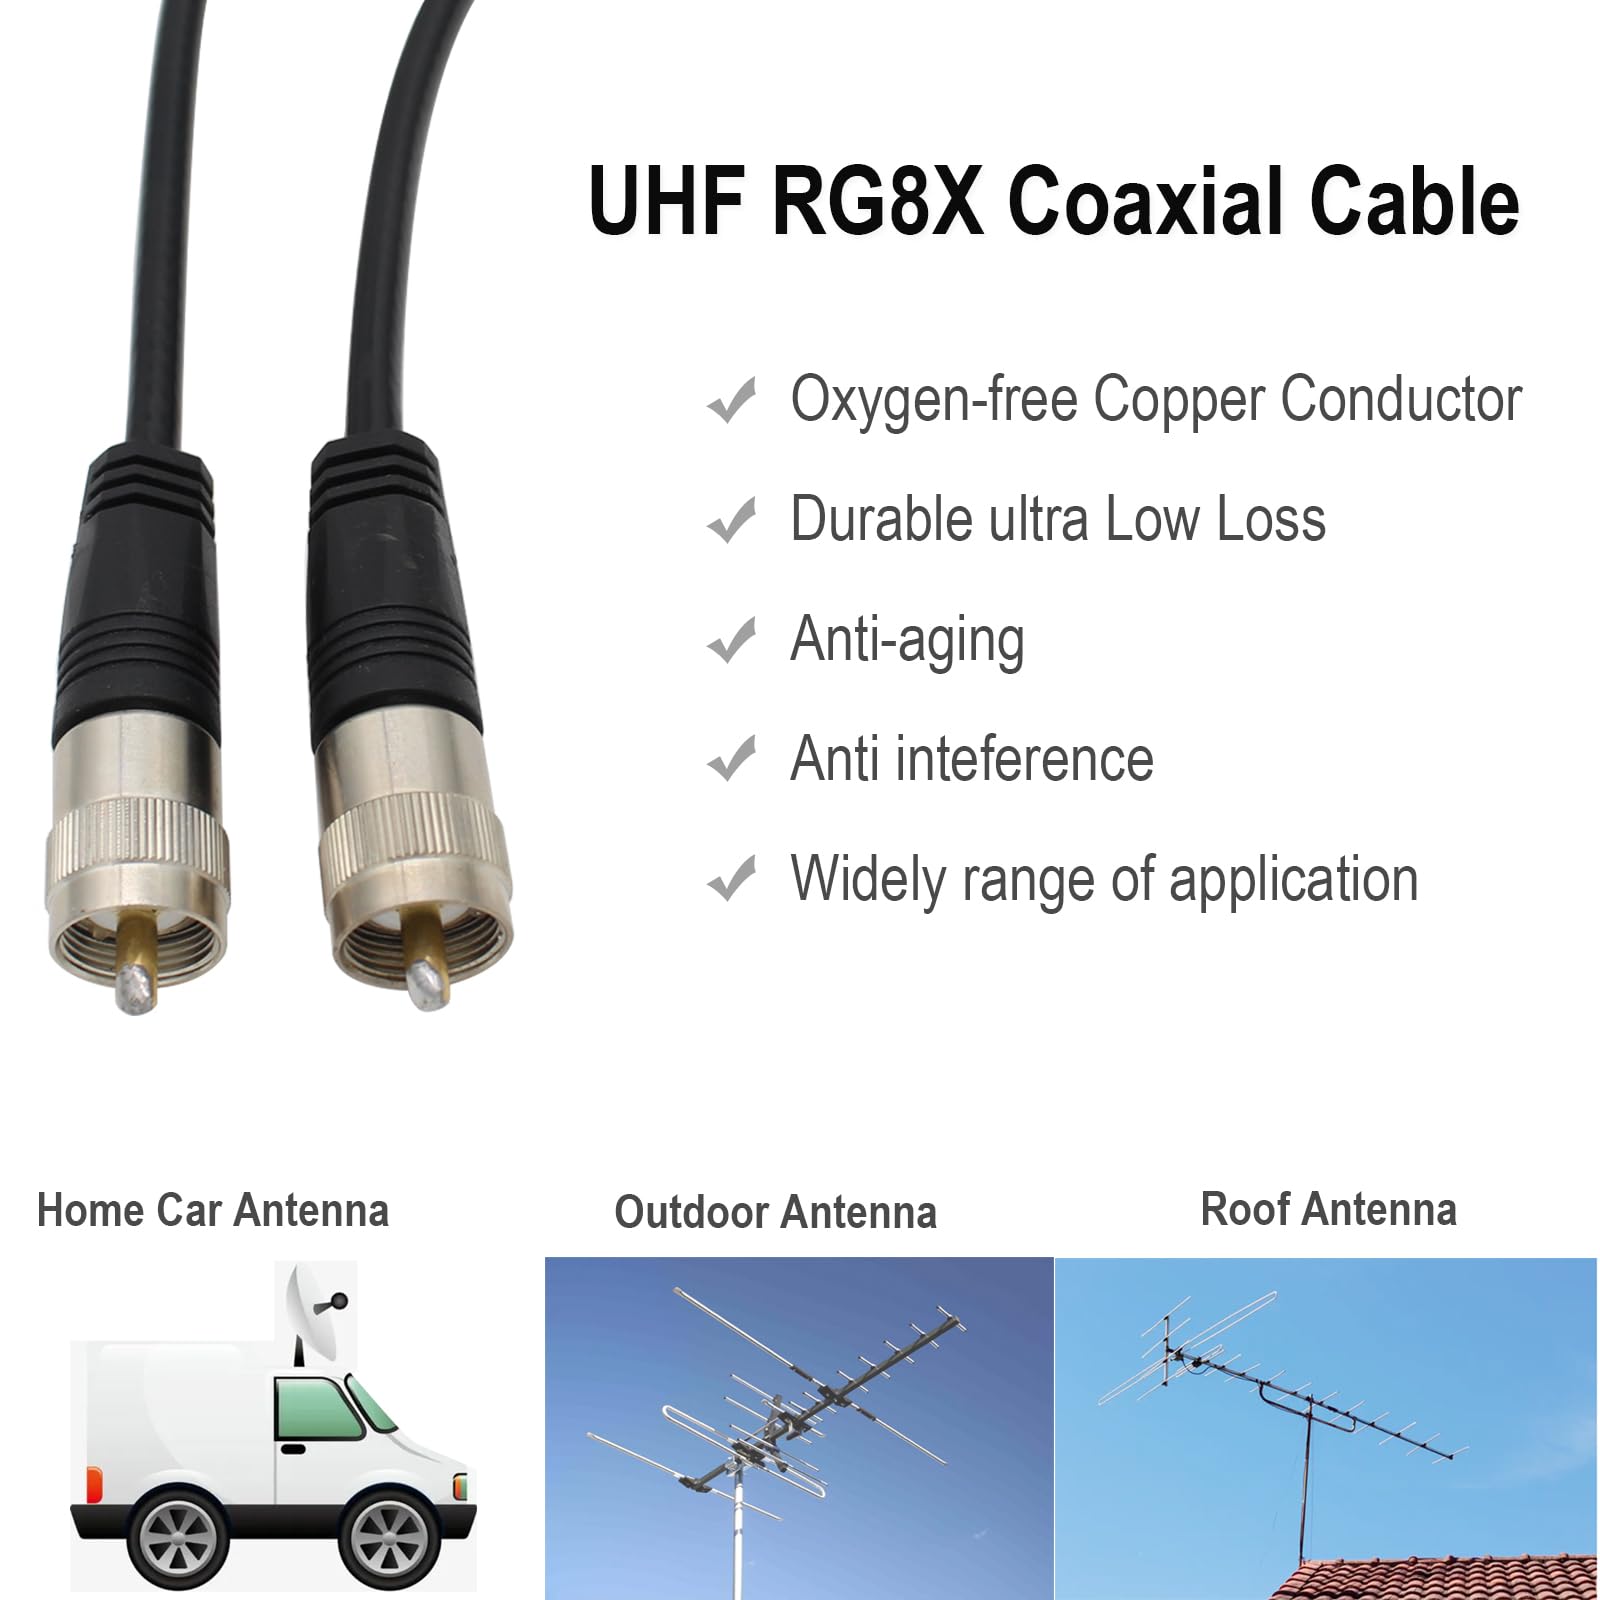 exgoofit RG8X Coaxial Cable 100ft, CB Coax Cable, UHF PL259 Male to Male Coaxial Cable Connector for HAM Radio, Antenna Analyzer